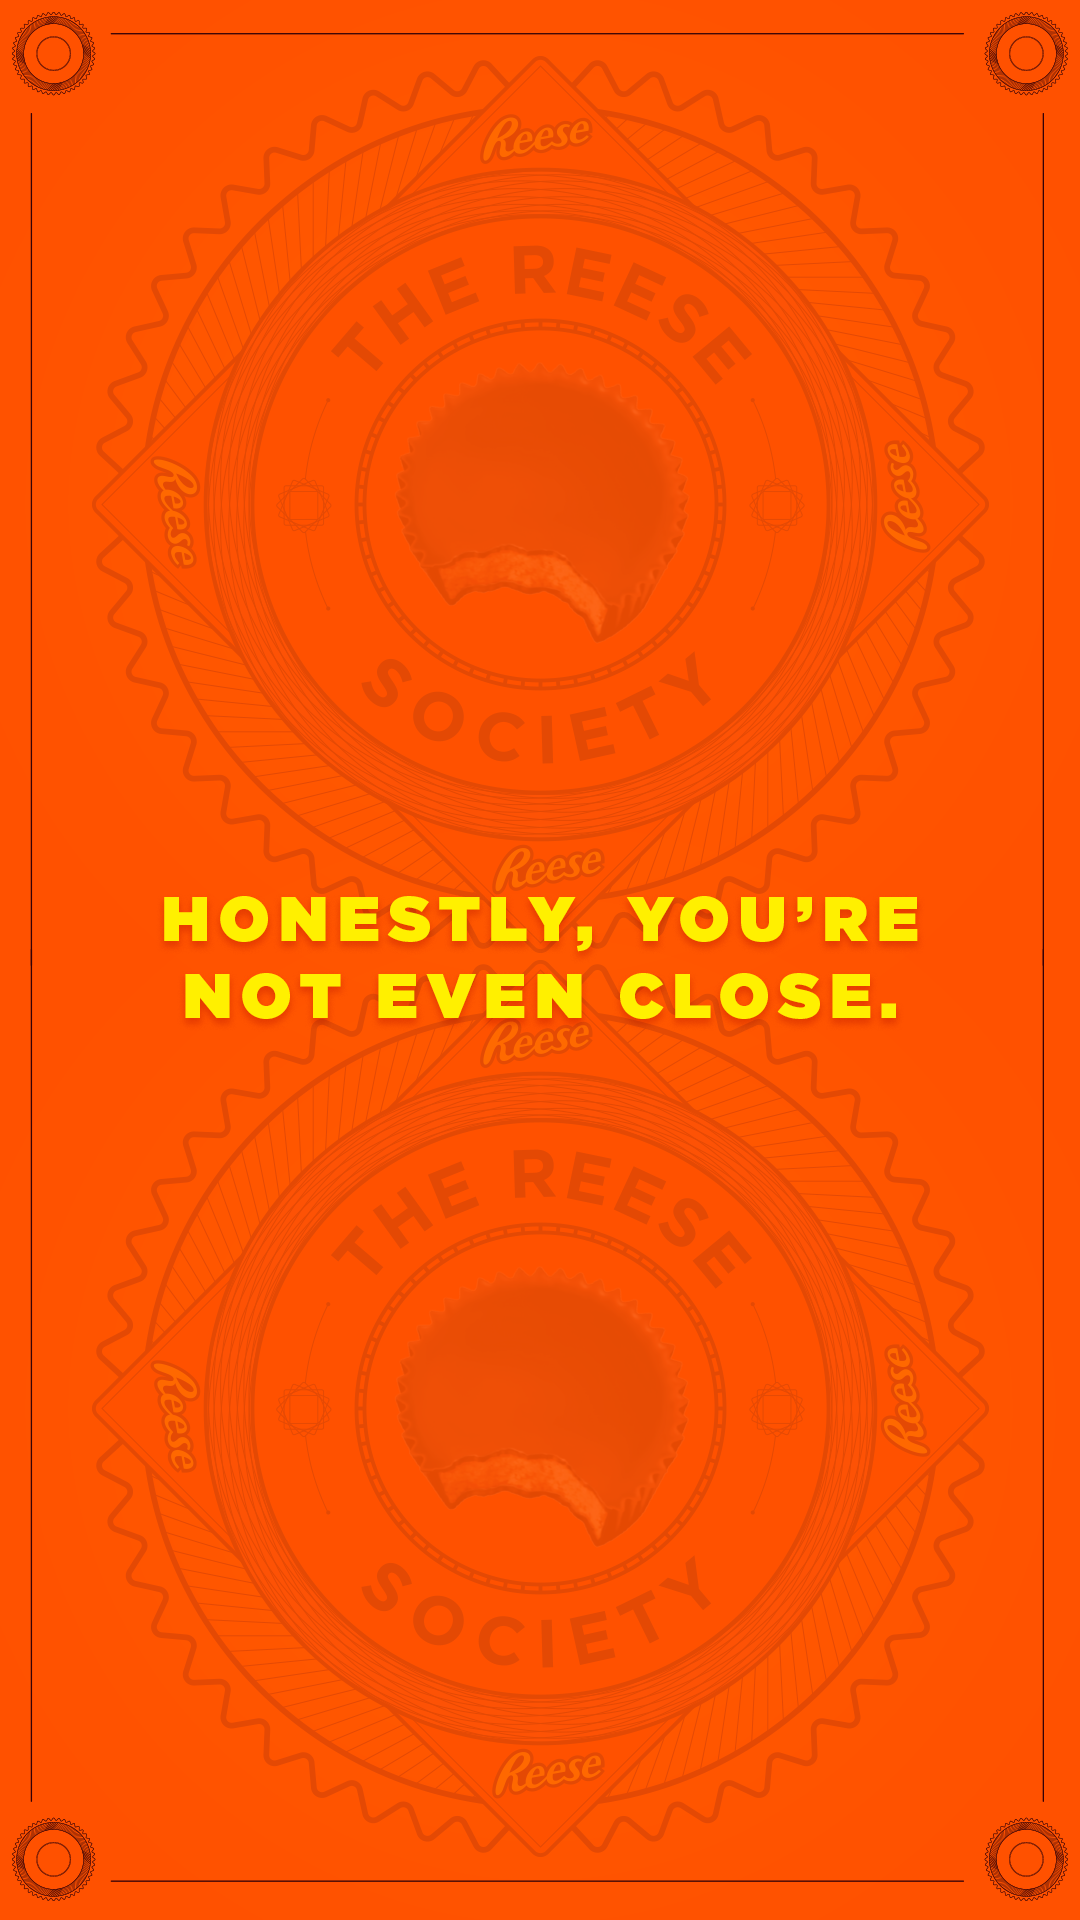 Reese-Society-IG_0037_Honestly,-you’re-not-even-close.png